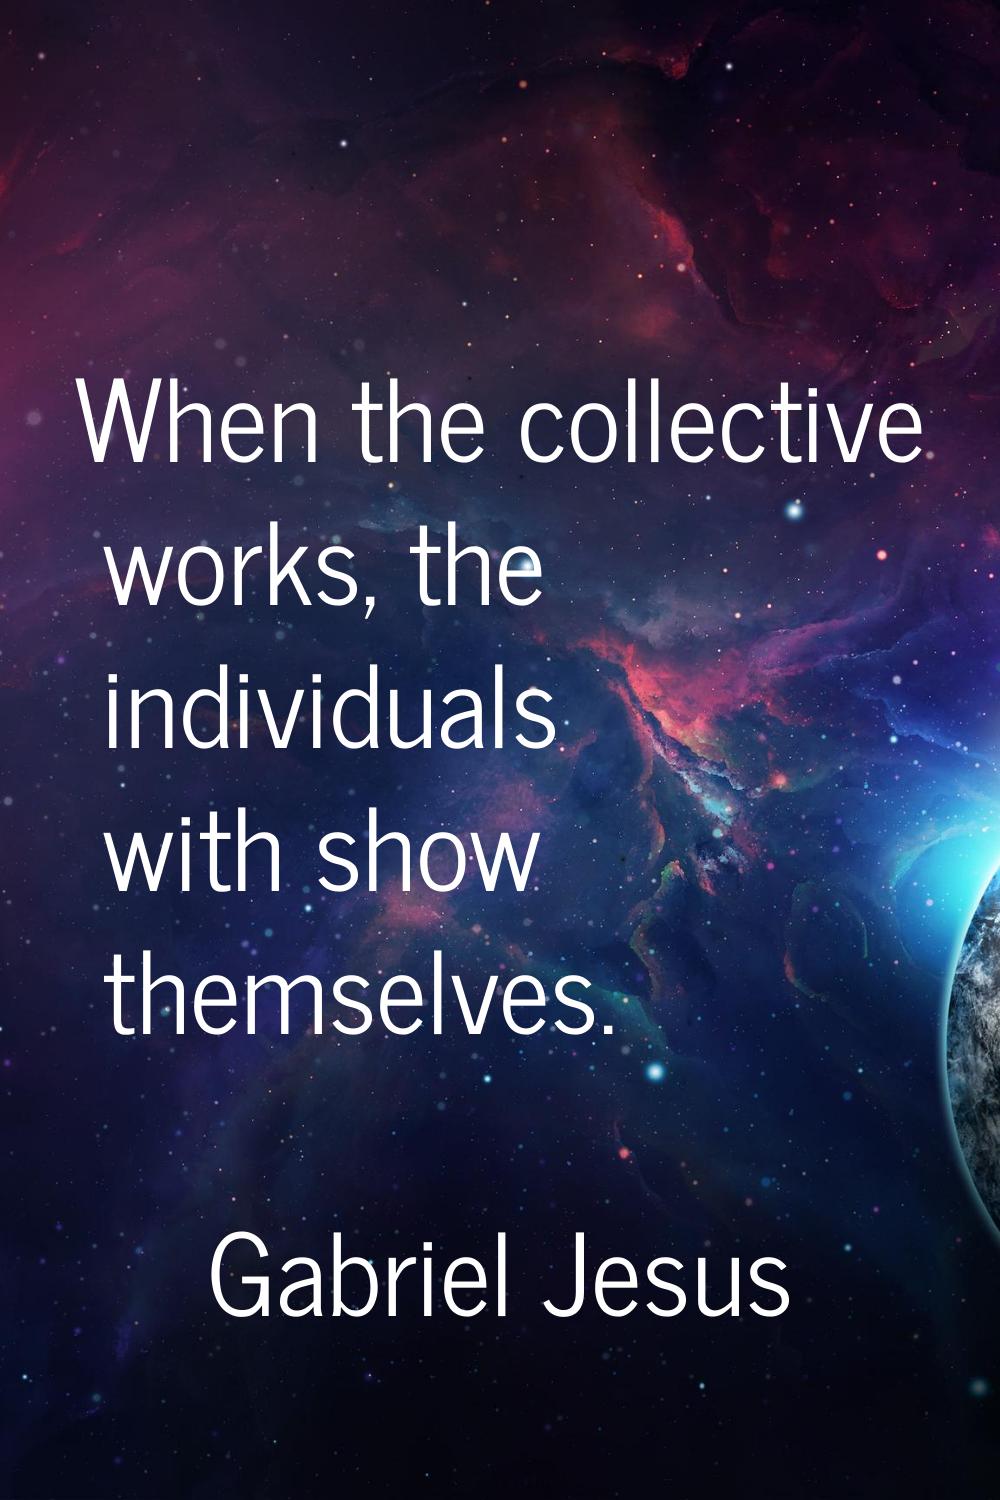 When the collective works, the individuals with show themselves.